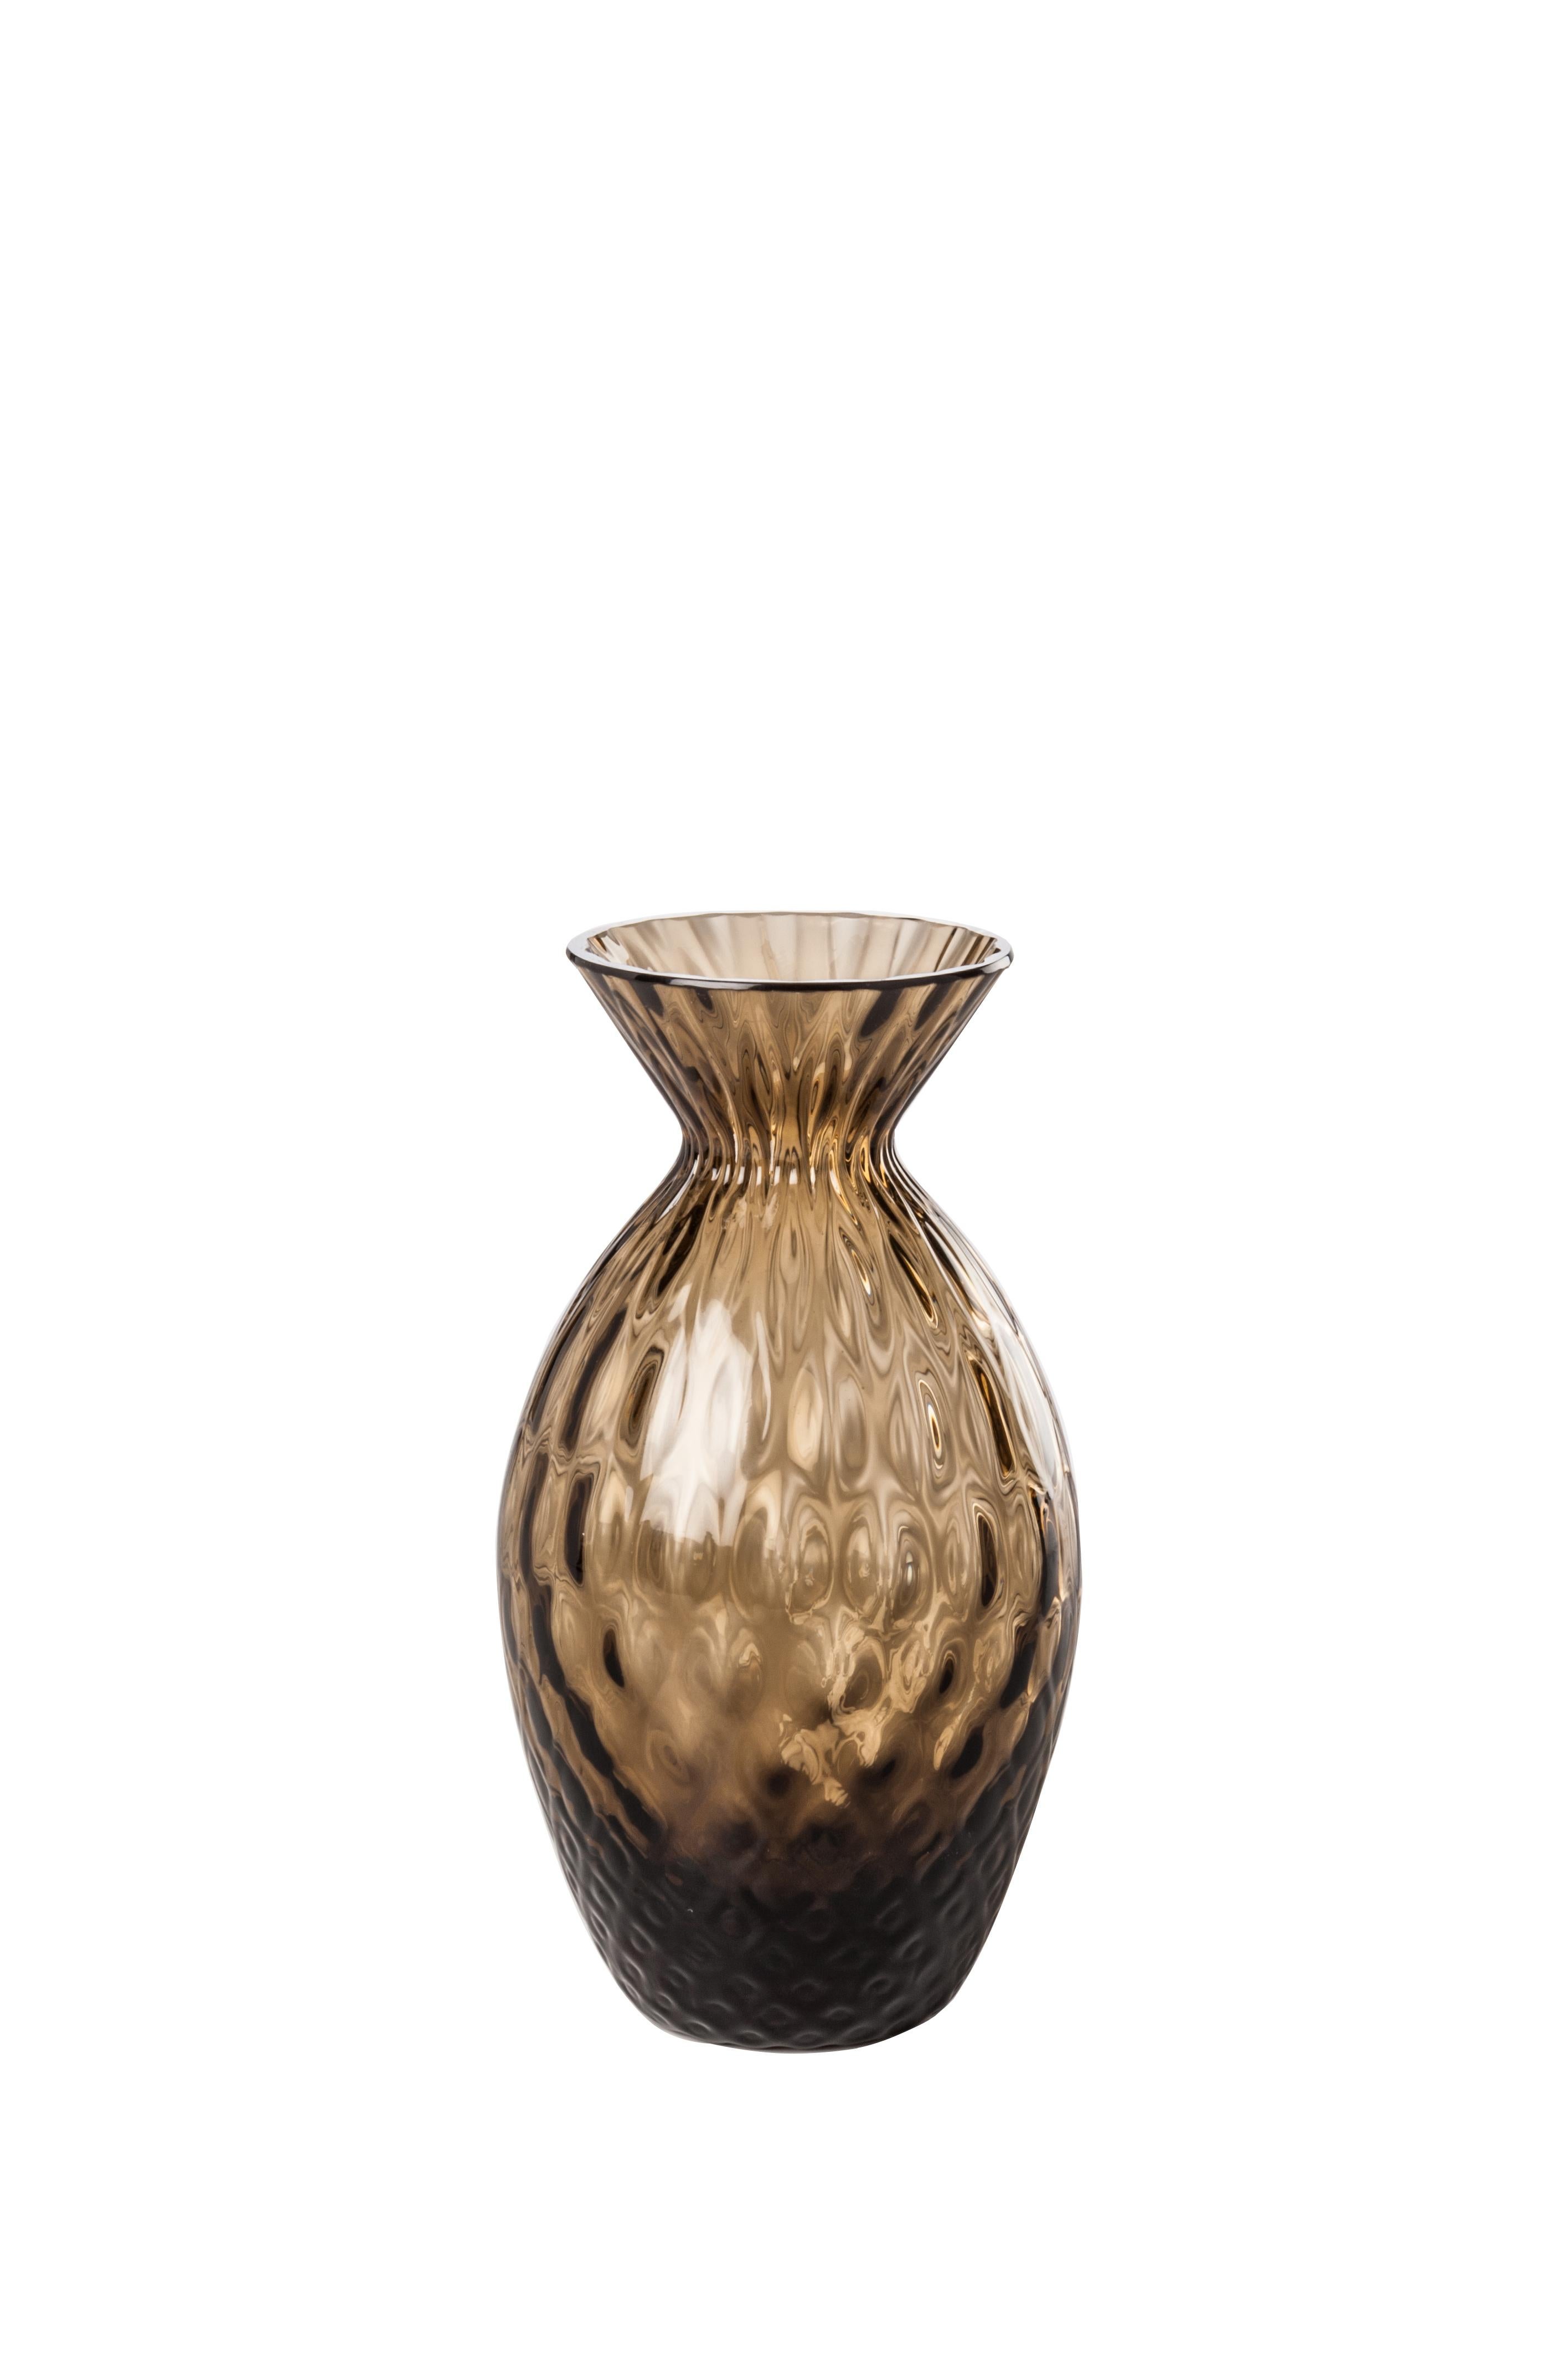 Venini glass vase with shaped body and neck in tea designed in 2017. Perfect for indoor home decor as container or statement piece for any room. Also available in other colors on 1stdibs. 

Dimensions: 8 cm diameter x 12 cm height.